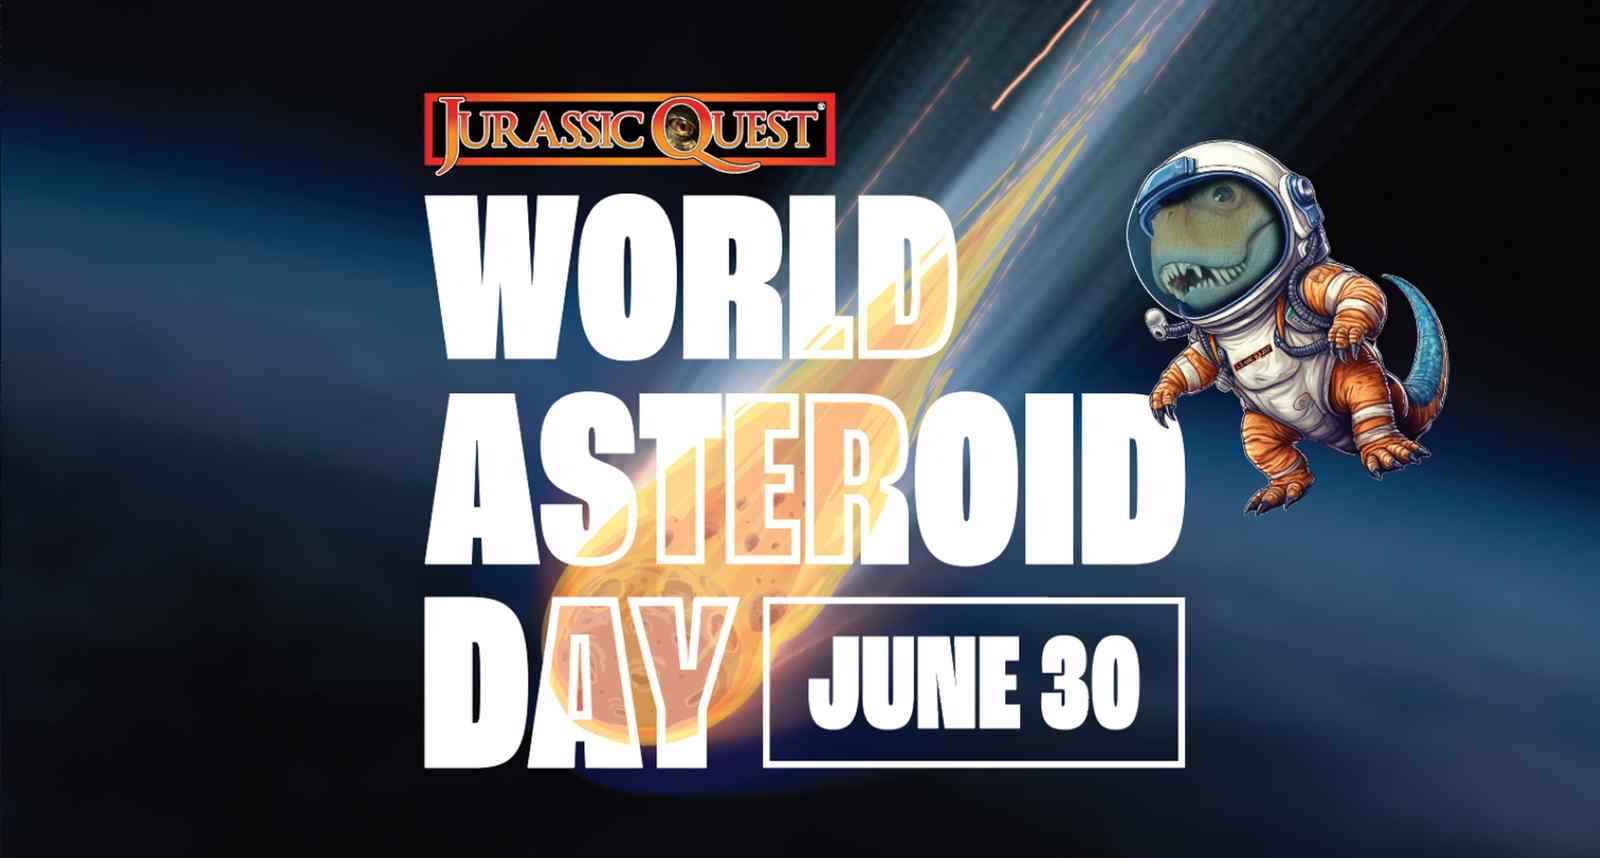 BubbleUp Unleashes Dino-mite Graphics for World Asteroid Day at NASA's Space Camp!